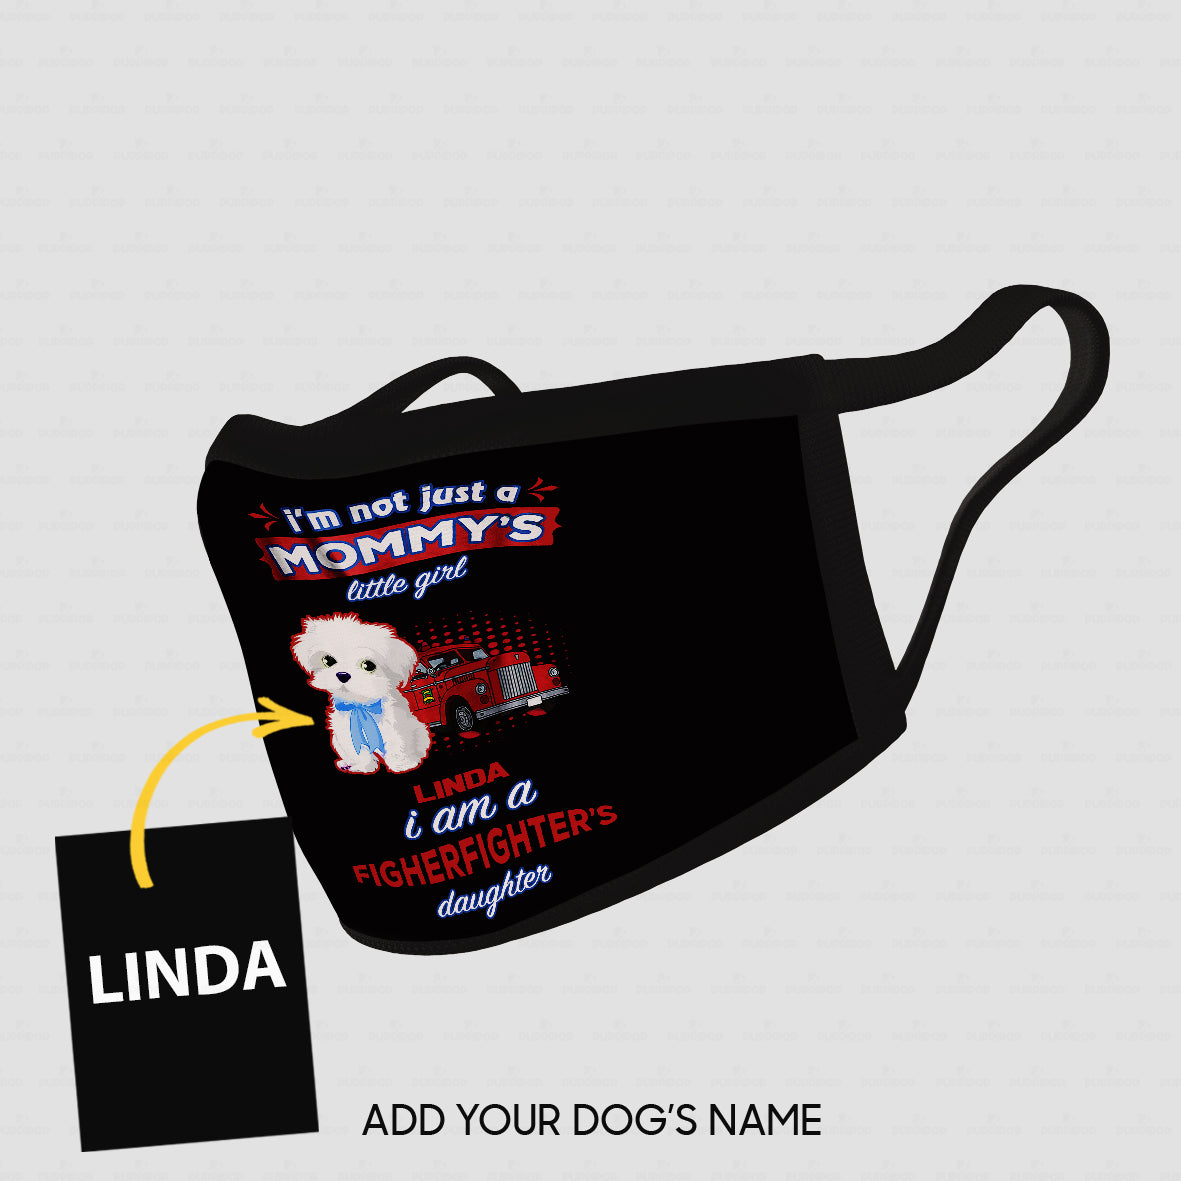 Personalized Dog Gift Idea - I'm Not Just A Mom, I Am Also A Firefighter For Dog Lovers - Cloth Mask